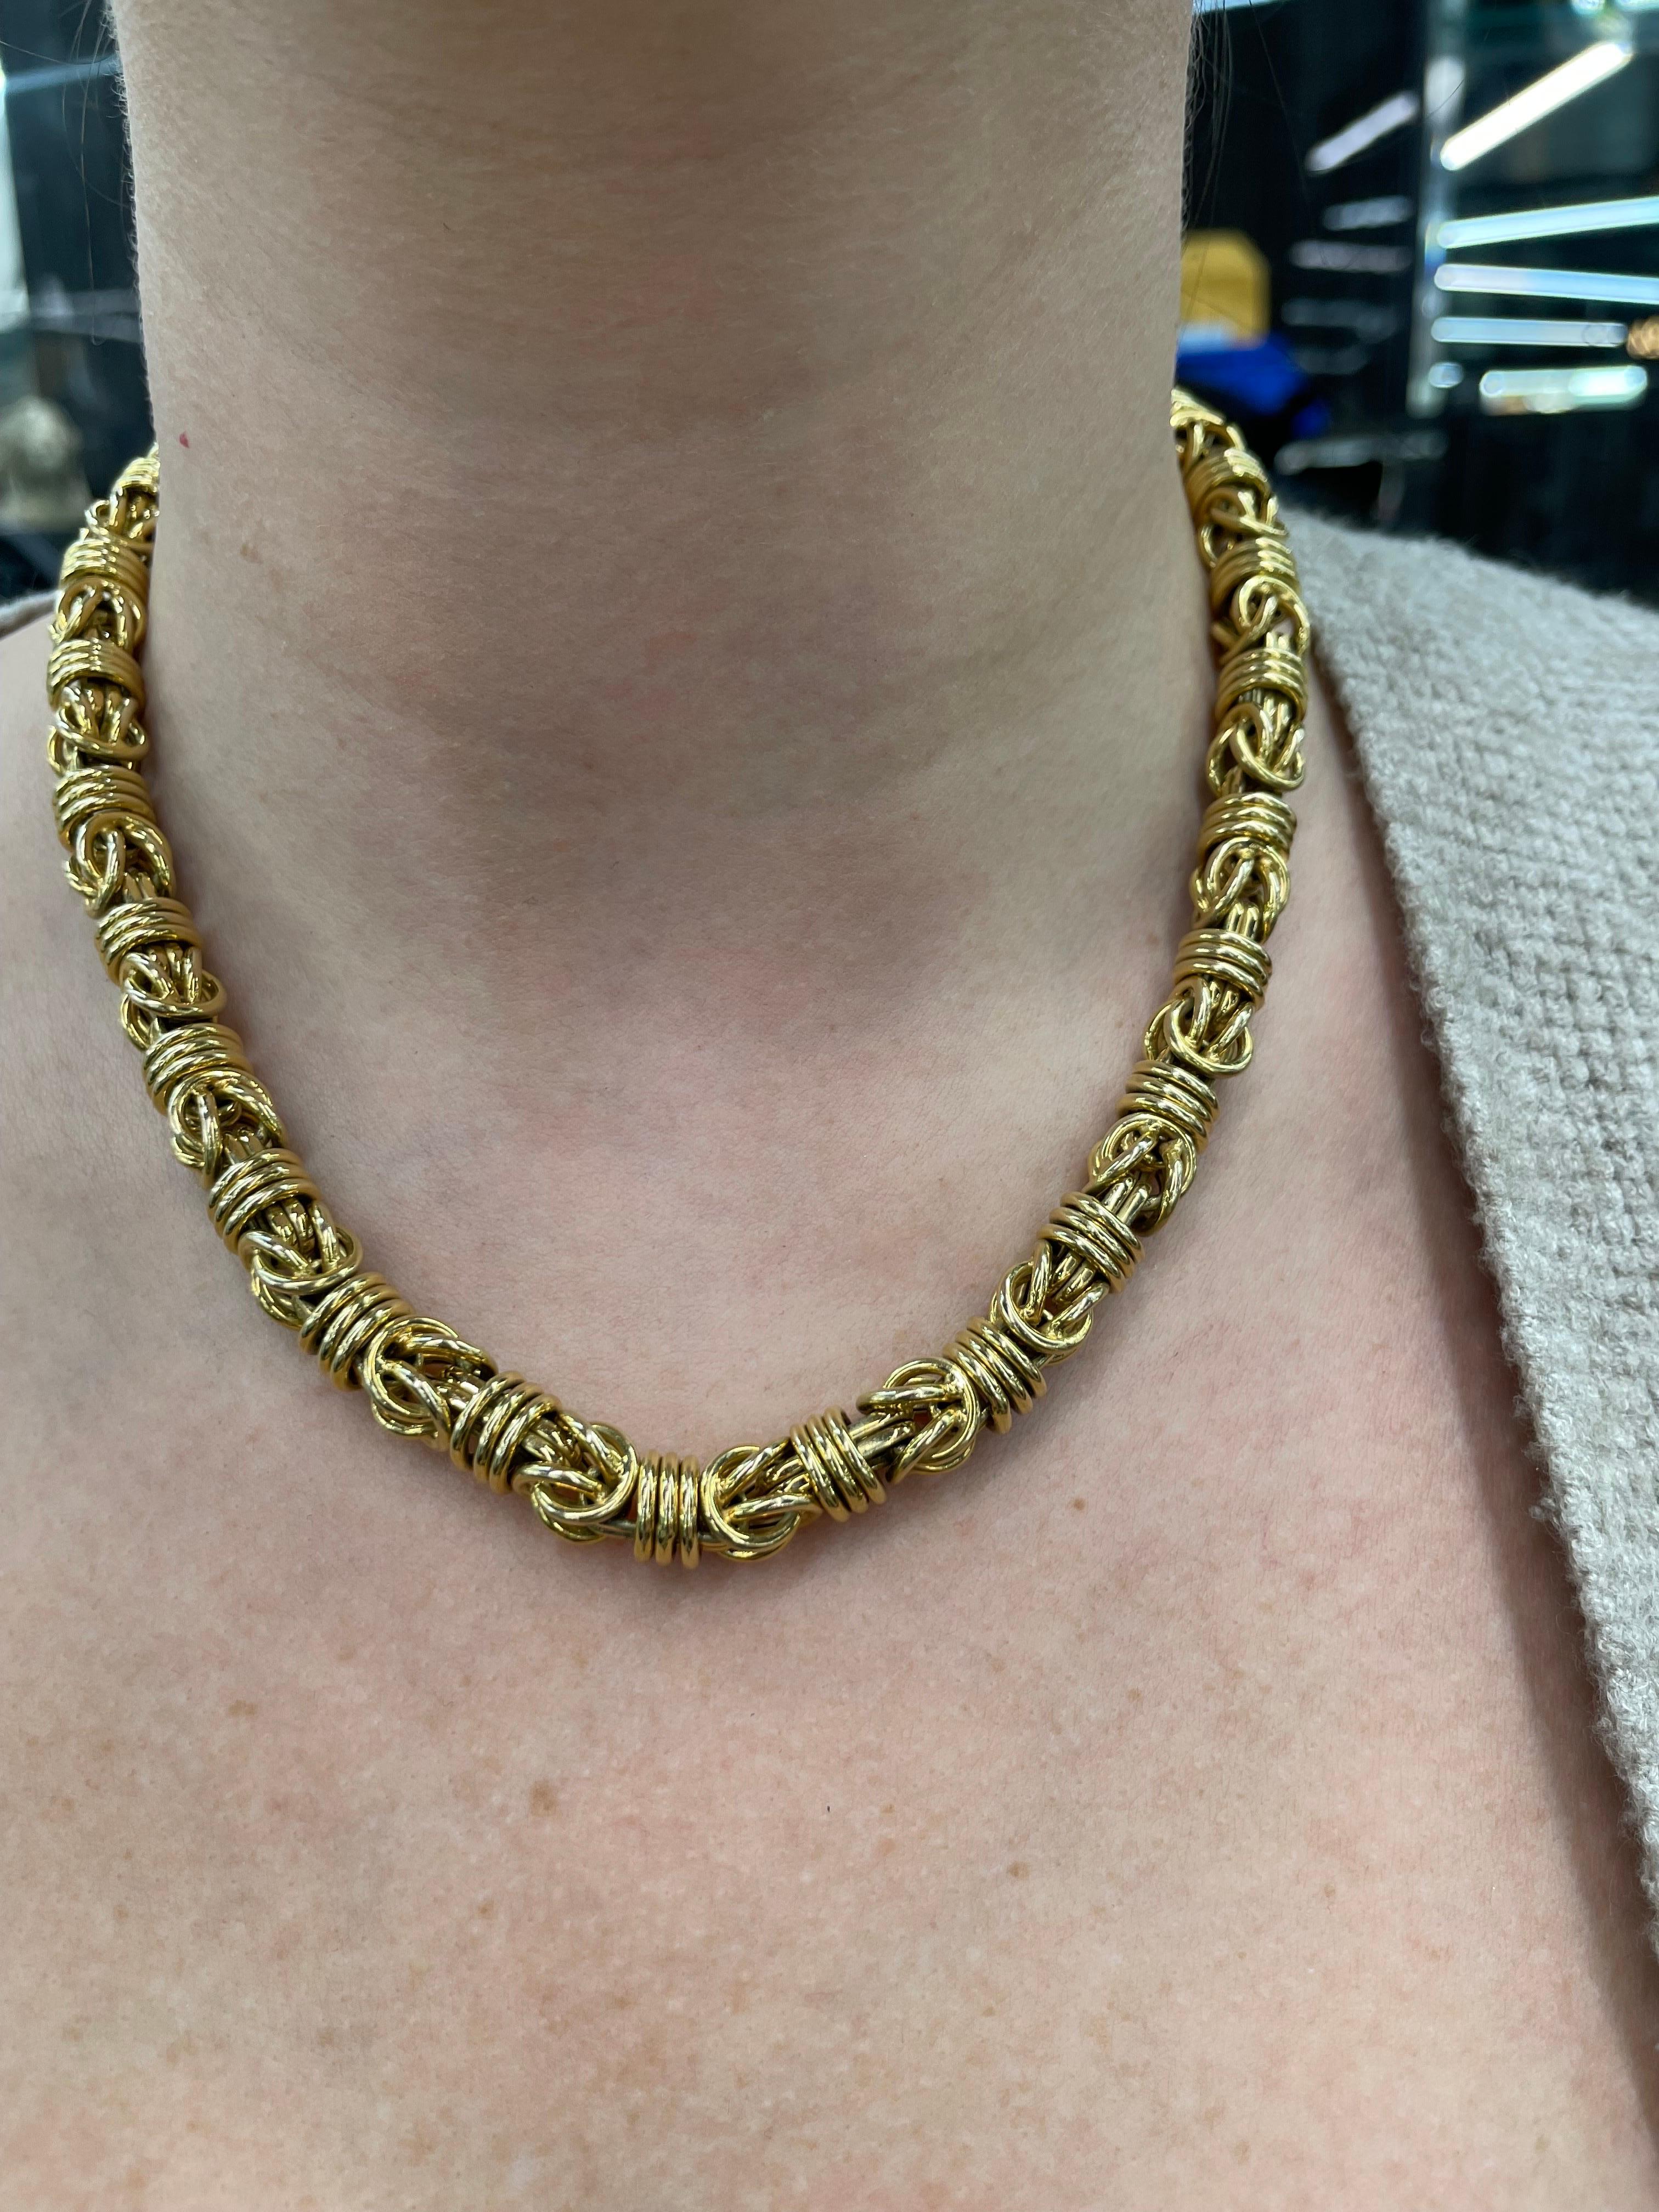 14 Karat Yellow Gold Byzantine Wide Necklace 70 Grams 18.5 Inches Made In Italy For Sale 5